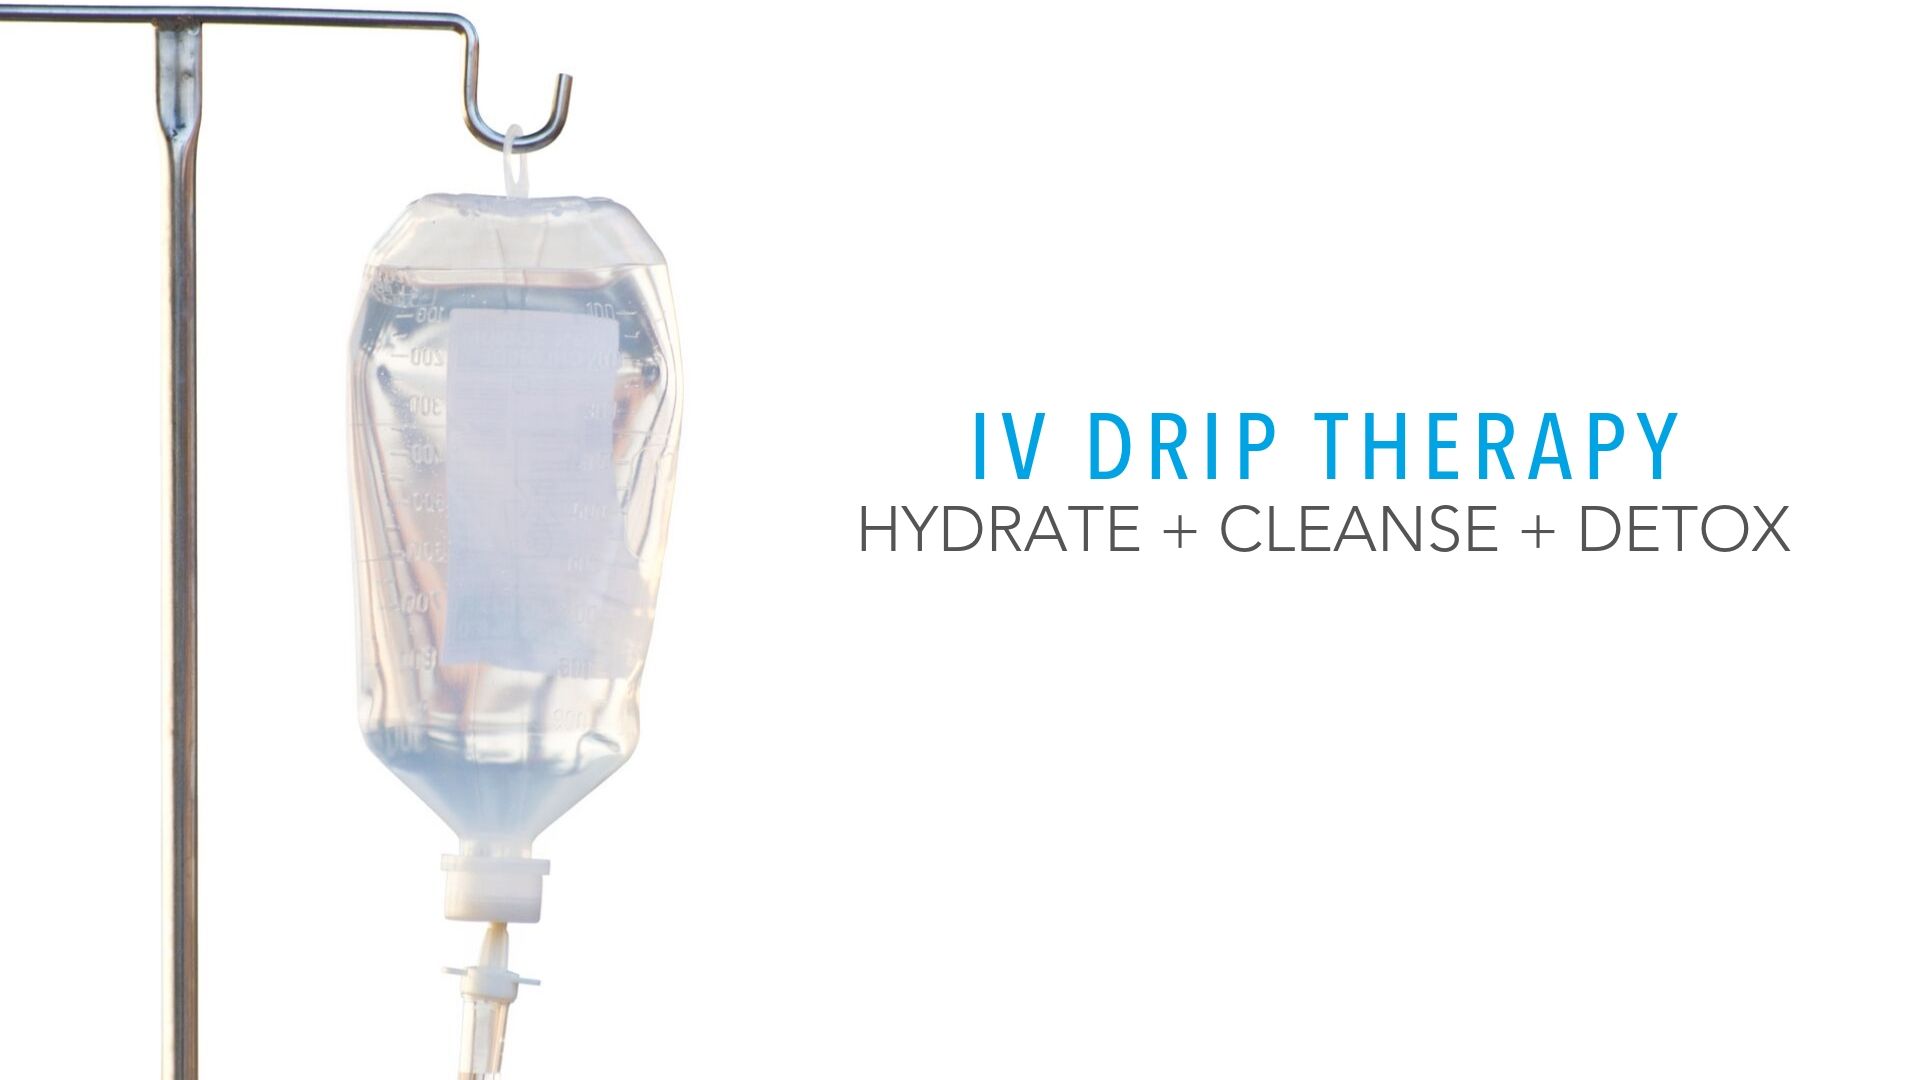 IV Drip Therapy at Shore Medical Aesthetics.